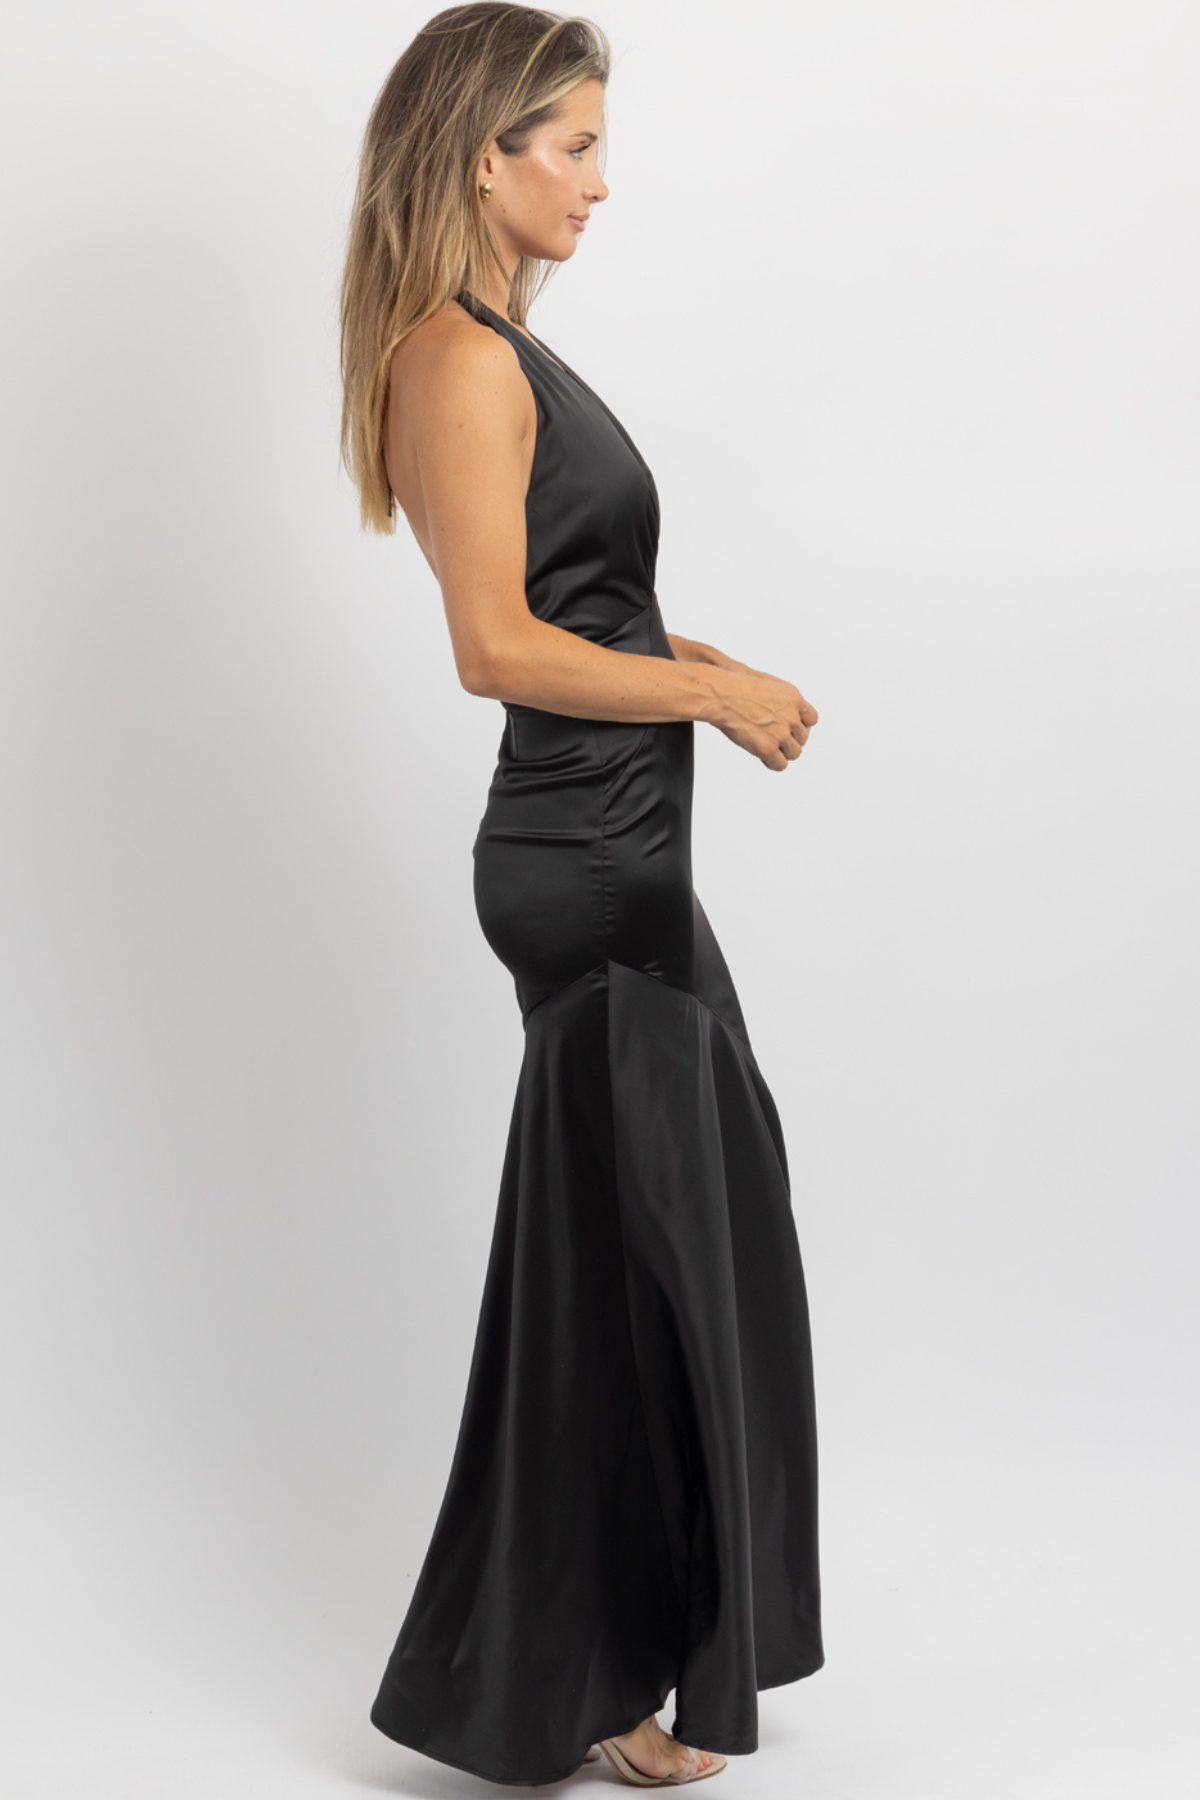 FINER THINGS PLUNGING MAXI DRESS *BACK IN STOCK* – L'ABEYE